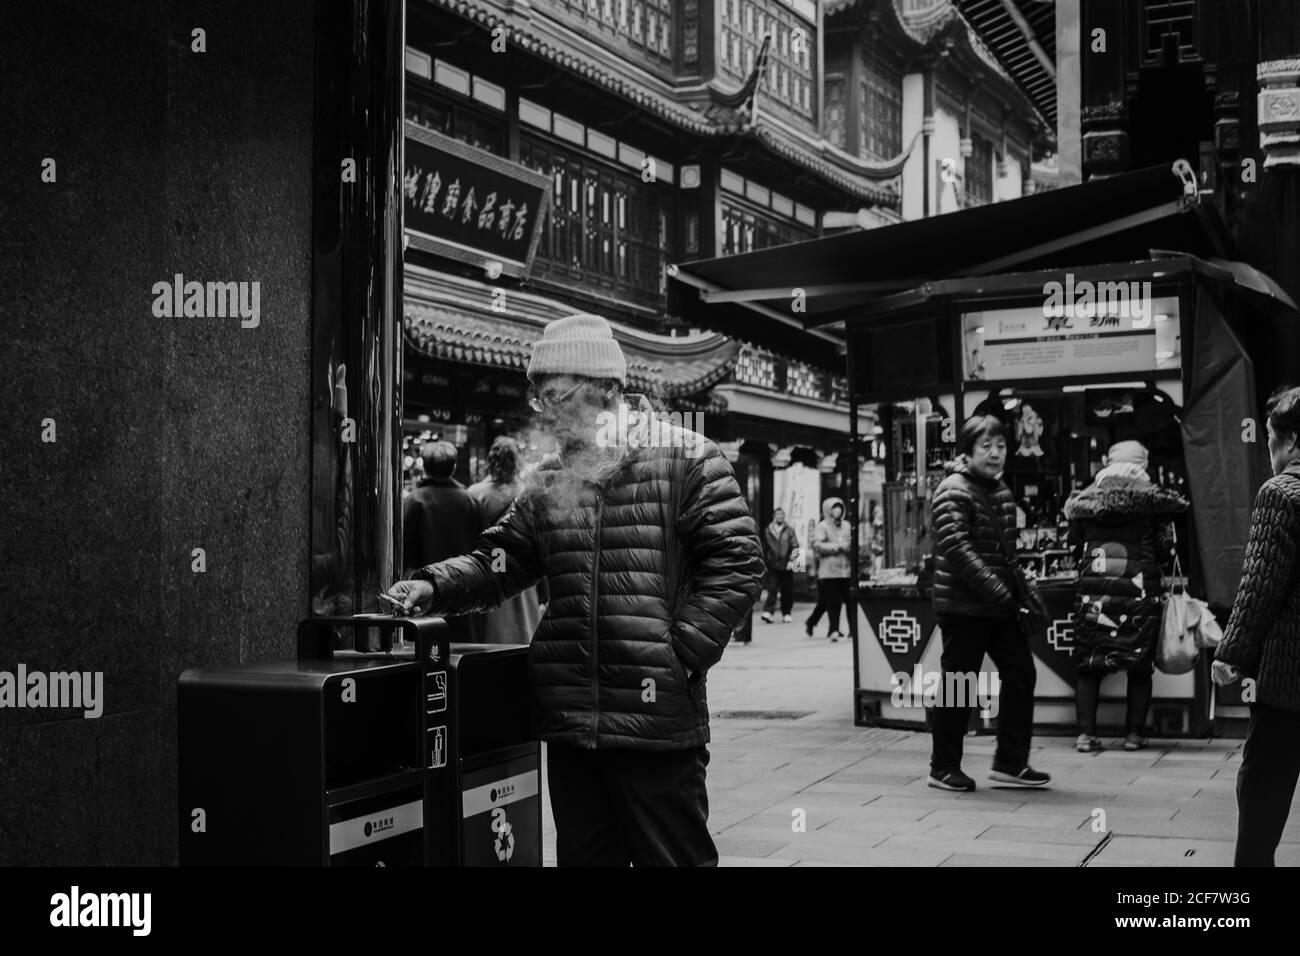 Shanghai, China - 12 December, 2018: Smoking adult male in warm jacket and knitted cap throwing cigarette to trash can while standing on street of Shanghai with traditional buildings and stalls Stock Photo